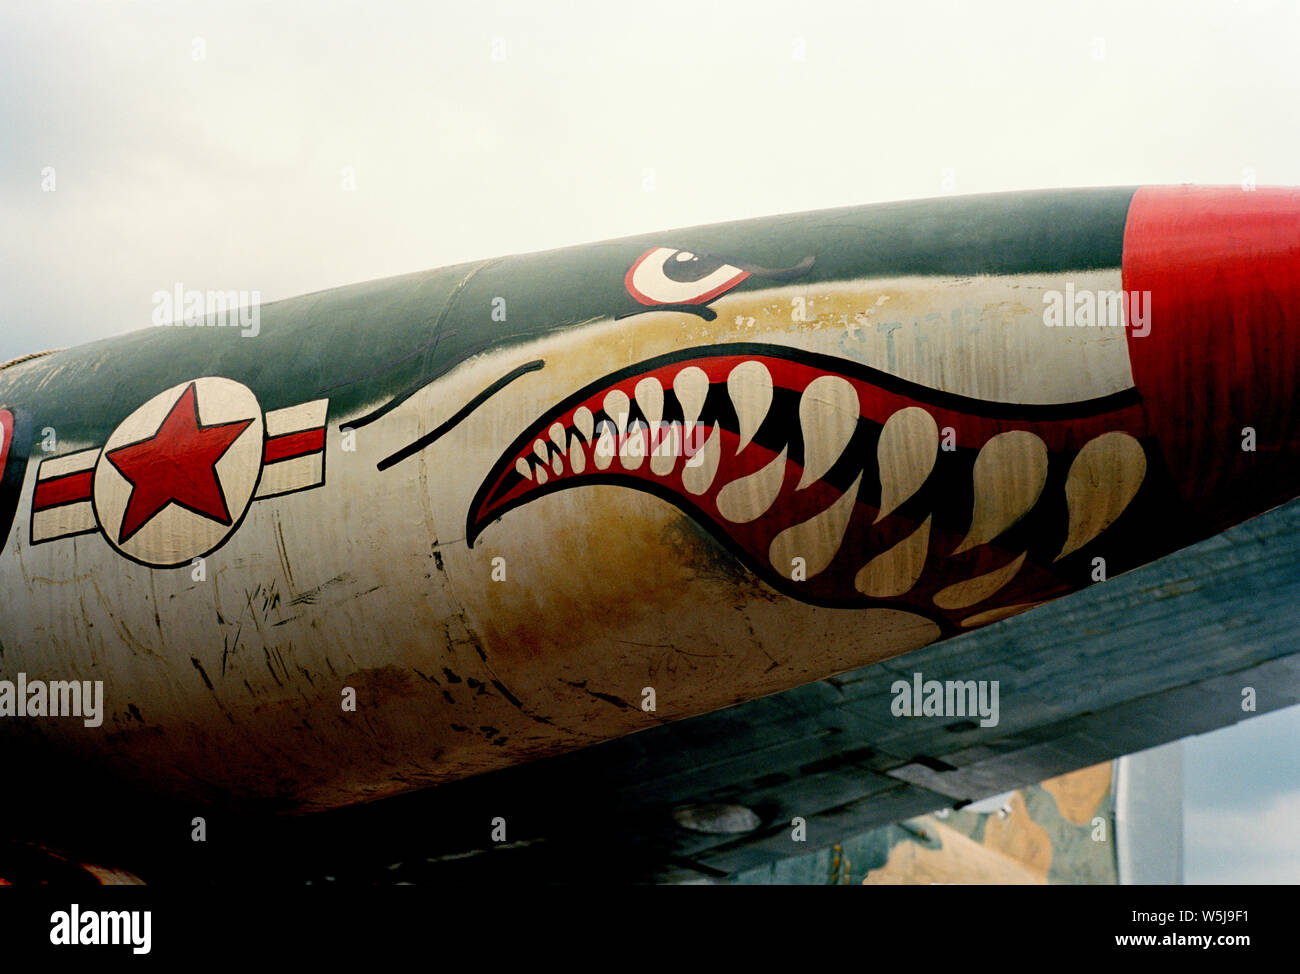 Sharks mouth American WW2-era bomber missile. Weapon Weapons Weaponry Military Bomb Humor Humour Humorous Stock Photo